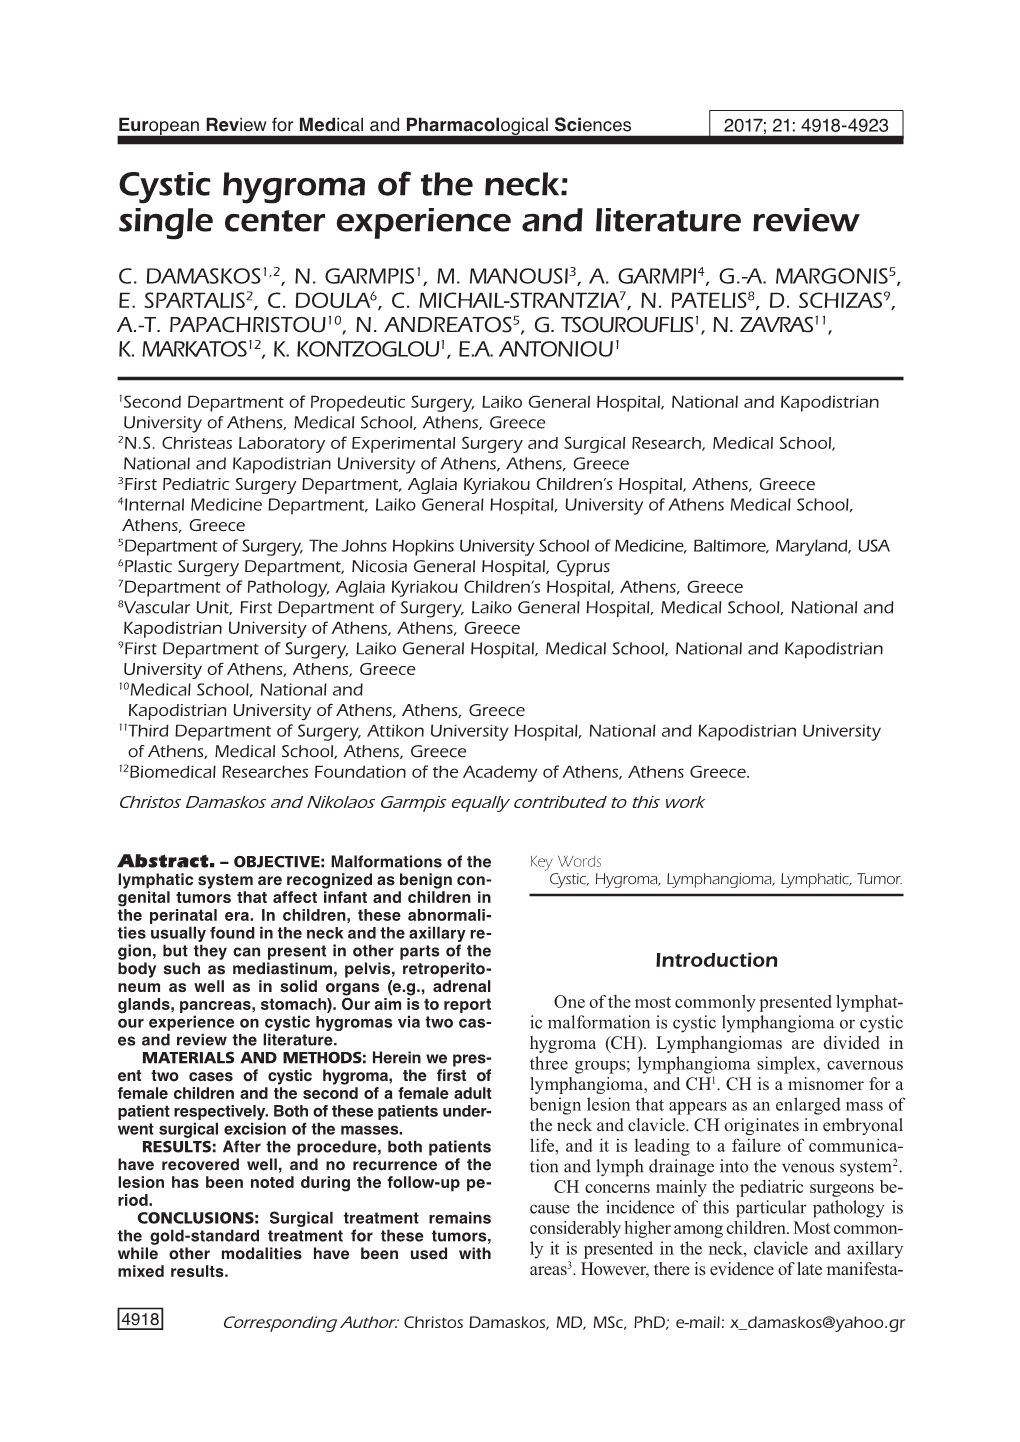 Cystic Hygroma of the Neck: Single Center Experience and Literature Review